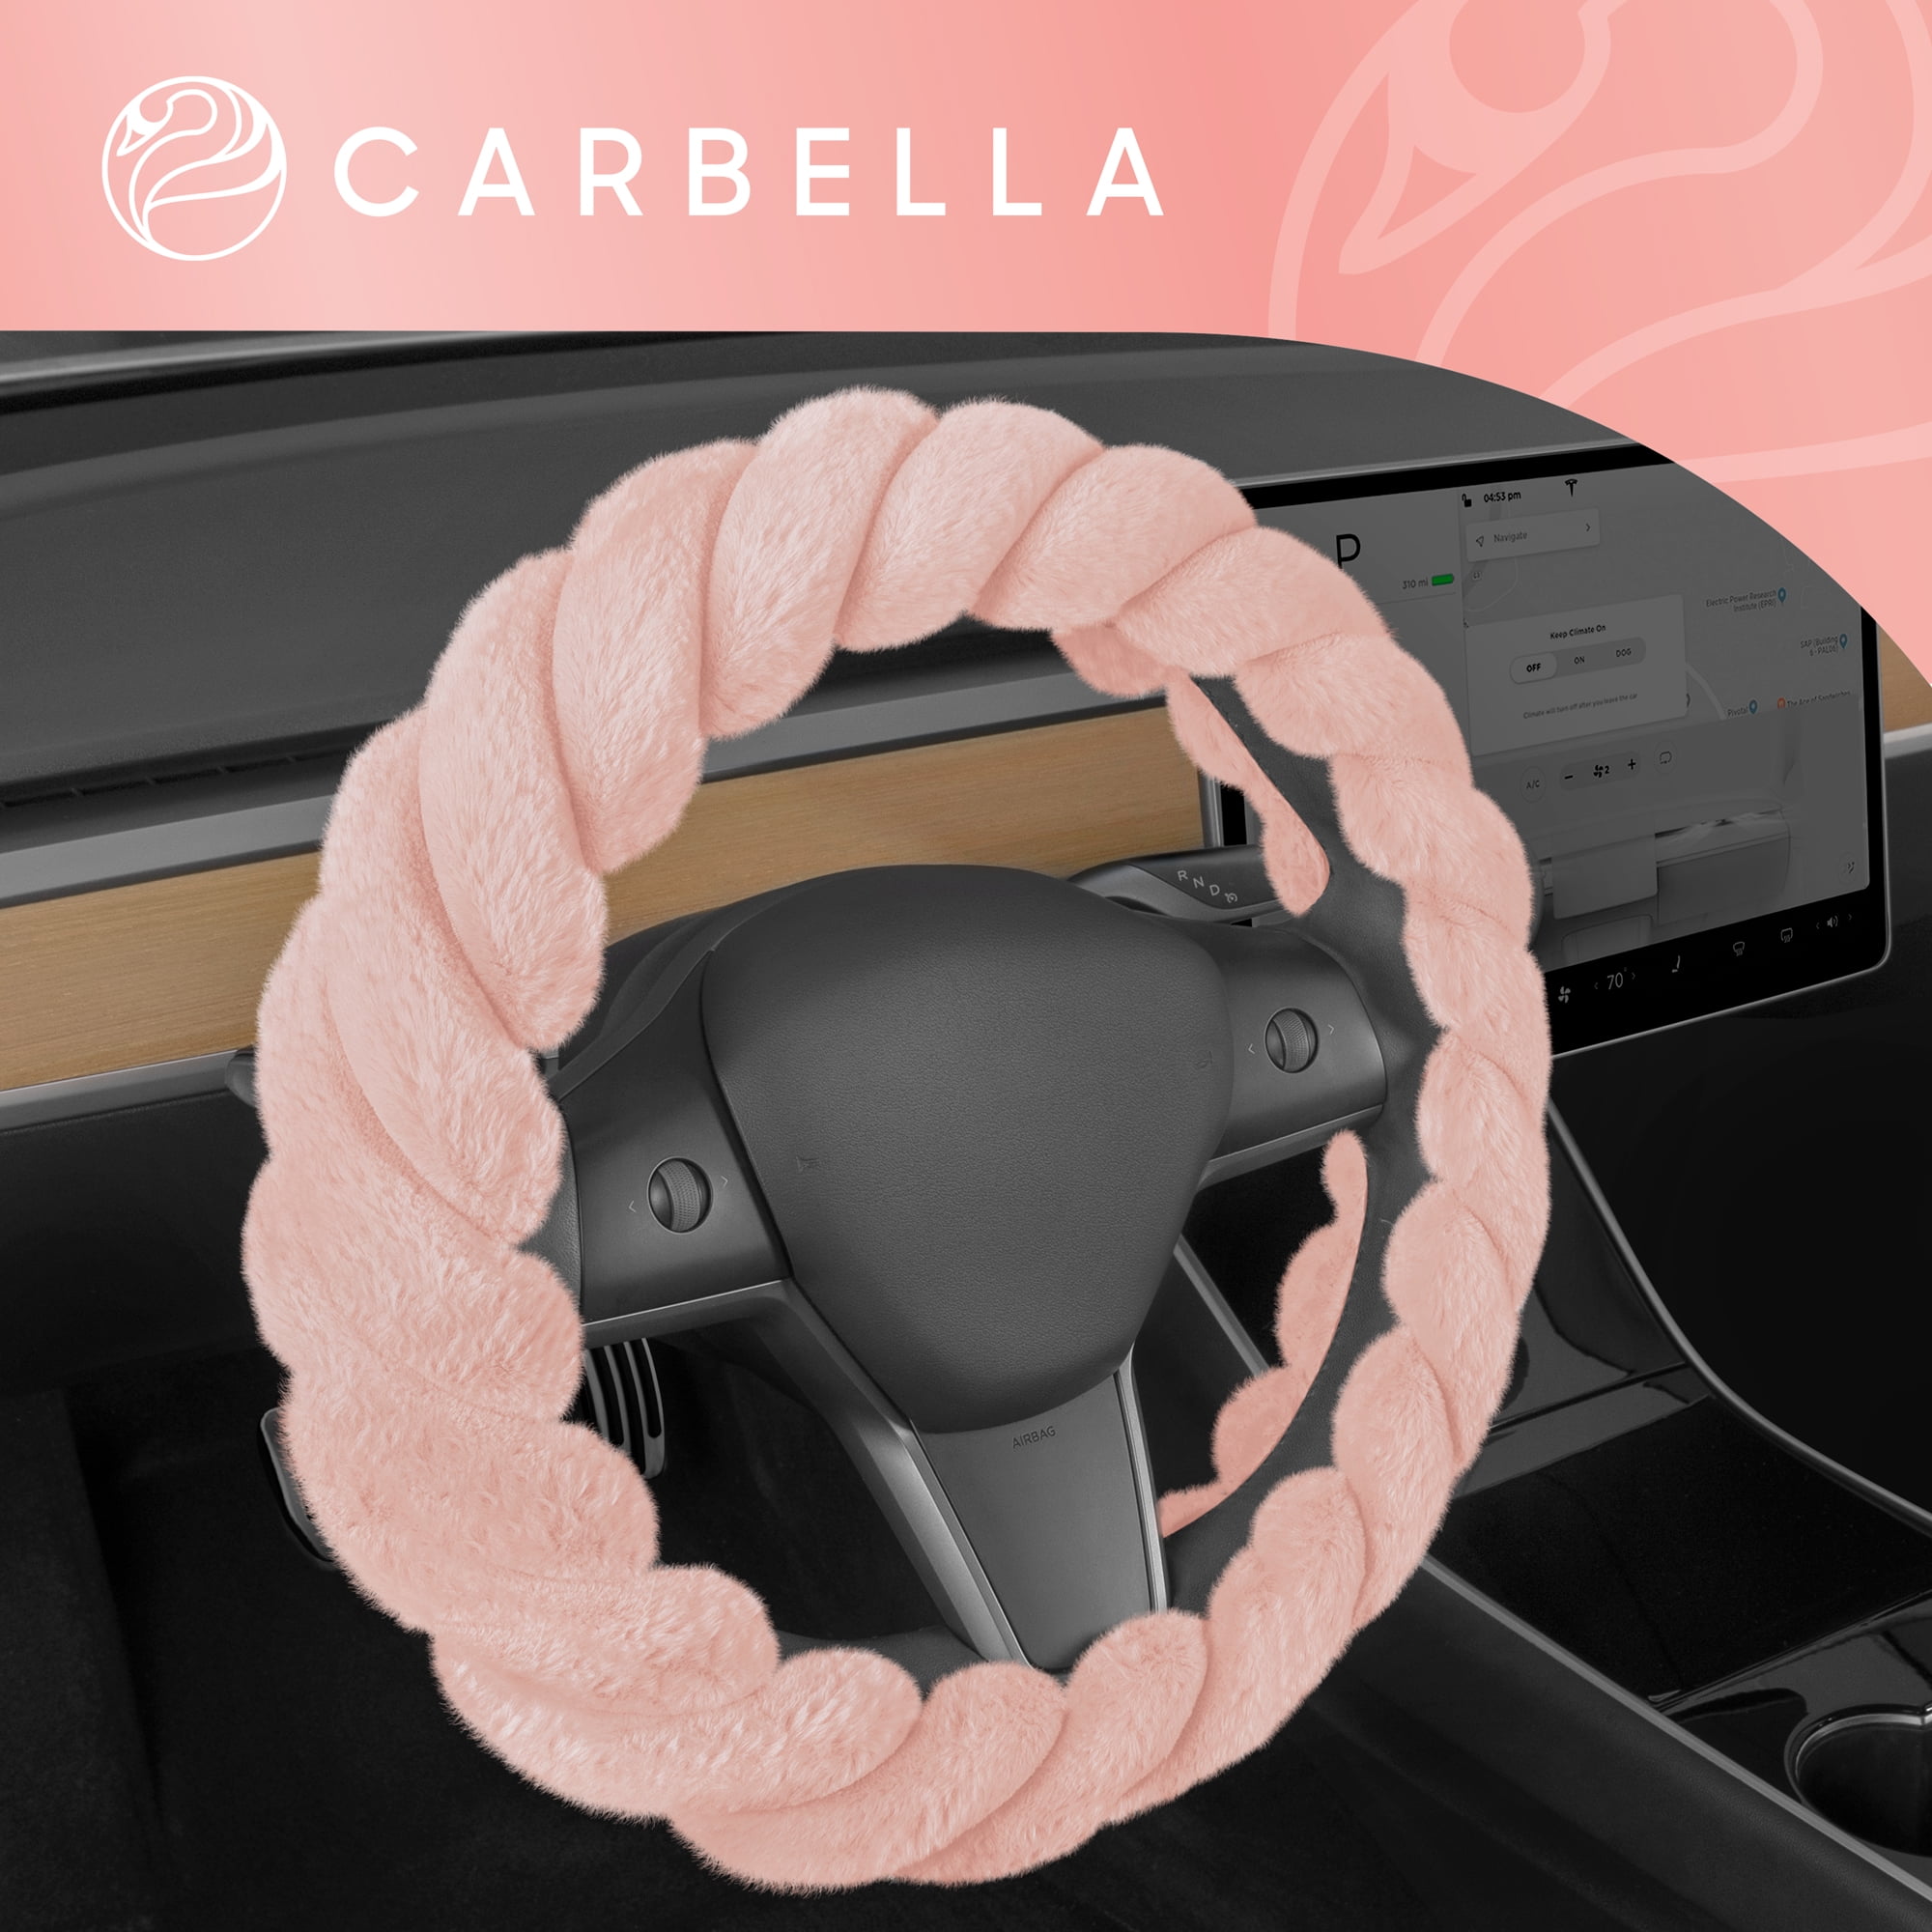  White Fluffy Steering Wheel Cover - Cute Floral Car Wheel Cover  for Women - Fuzzy Car Accessories : Automotive